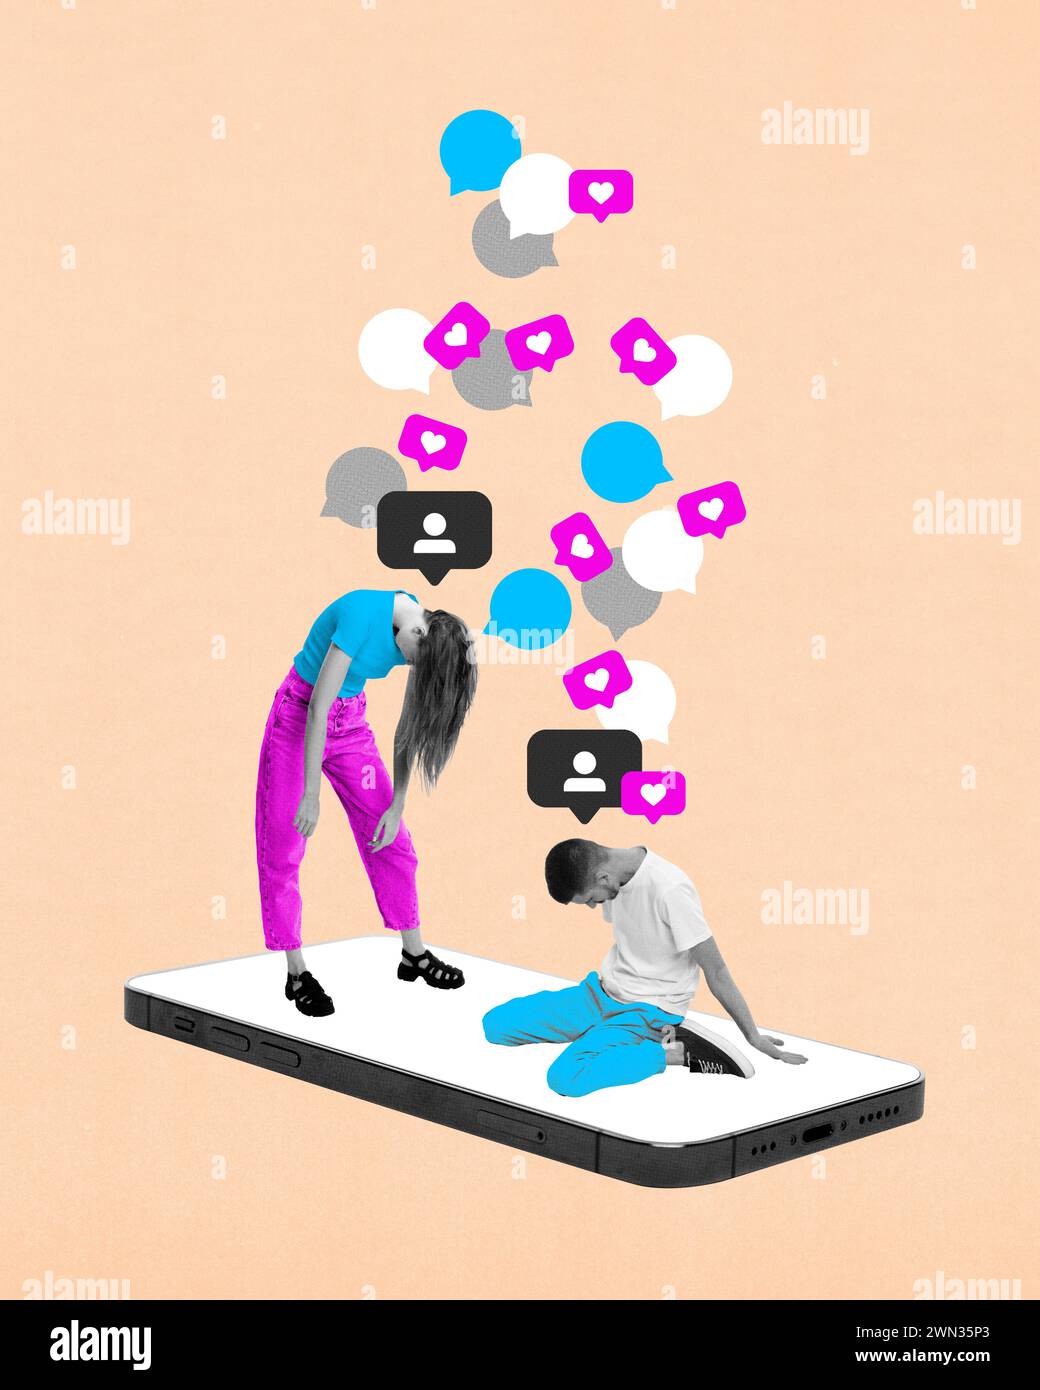 Young man and woman without energy on giant phone screen with speech and heart icons above them. Addiction. Contemporary art collage. Stock Photo